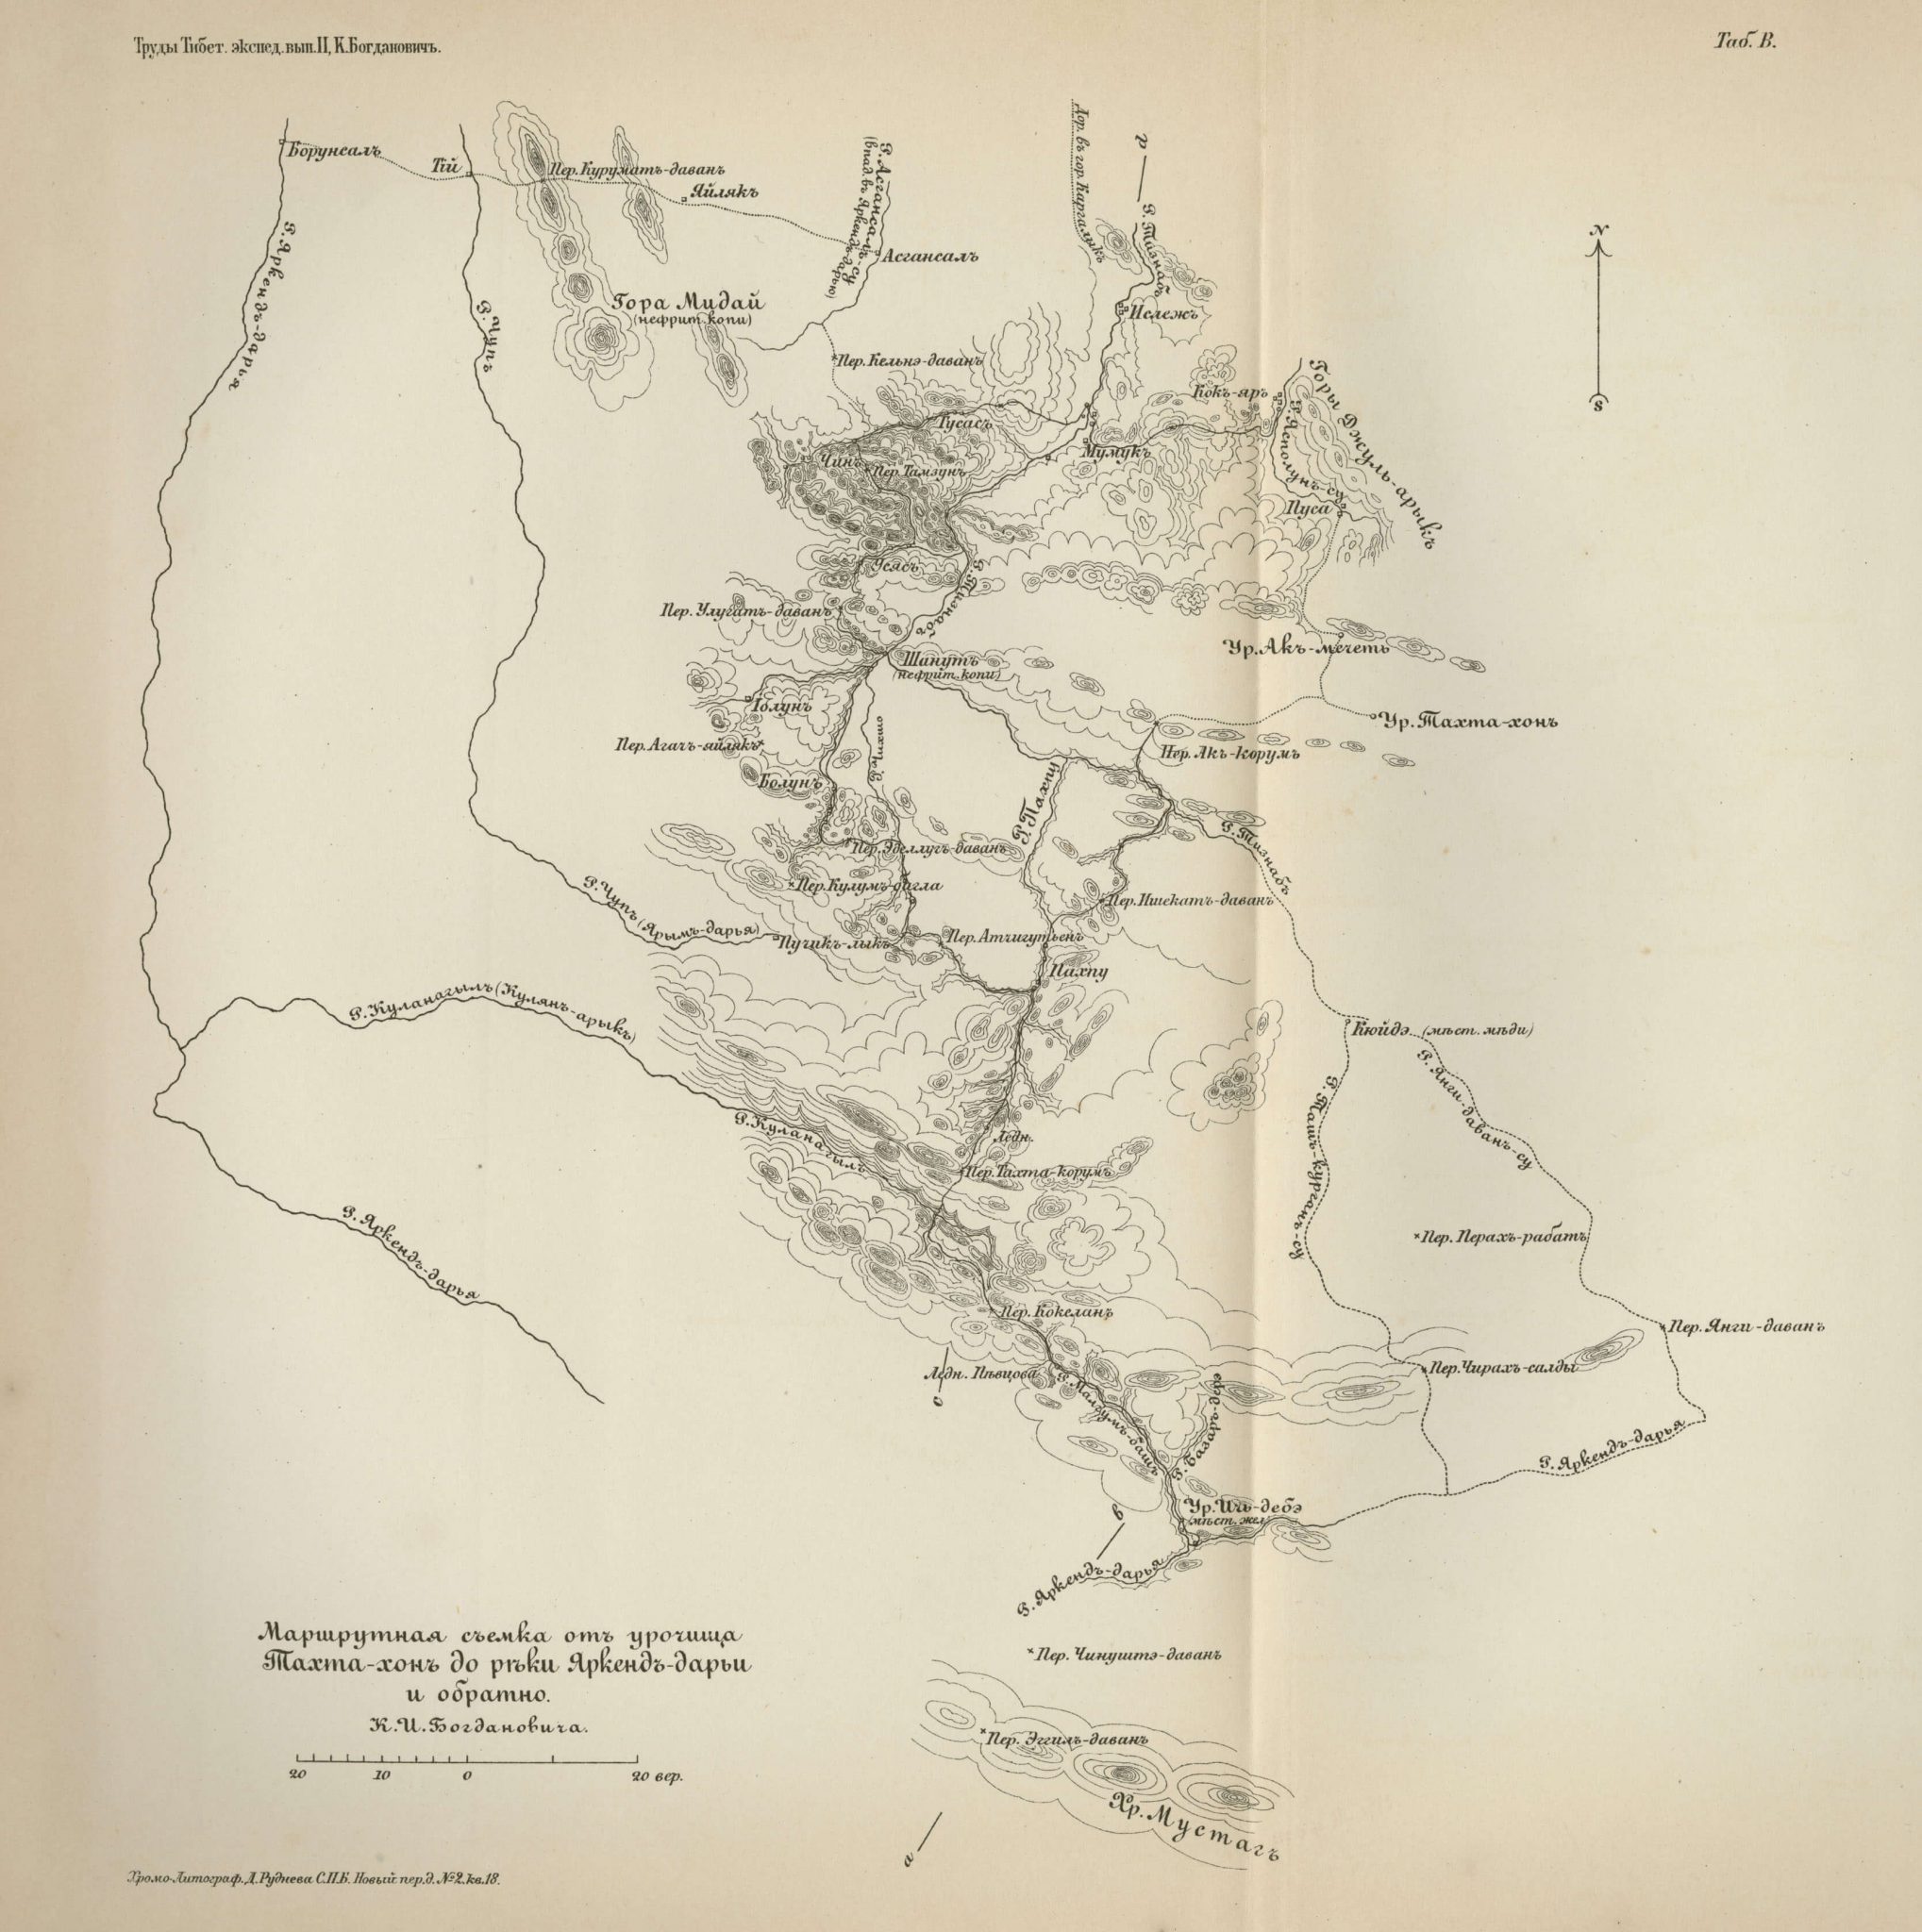 Route survey of the area surrounding Tahta Hon and the Yarkand River 1892